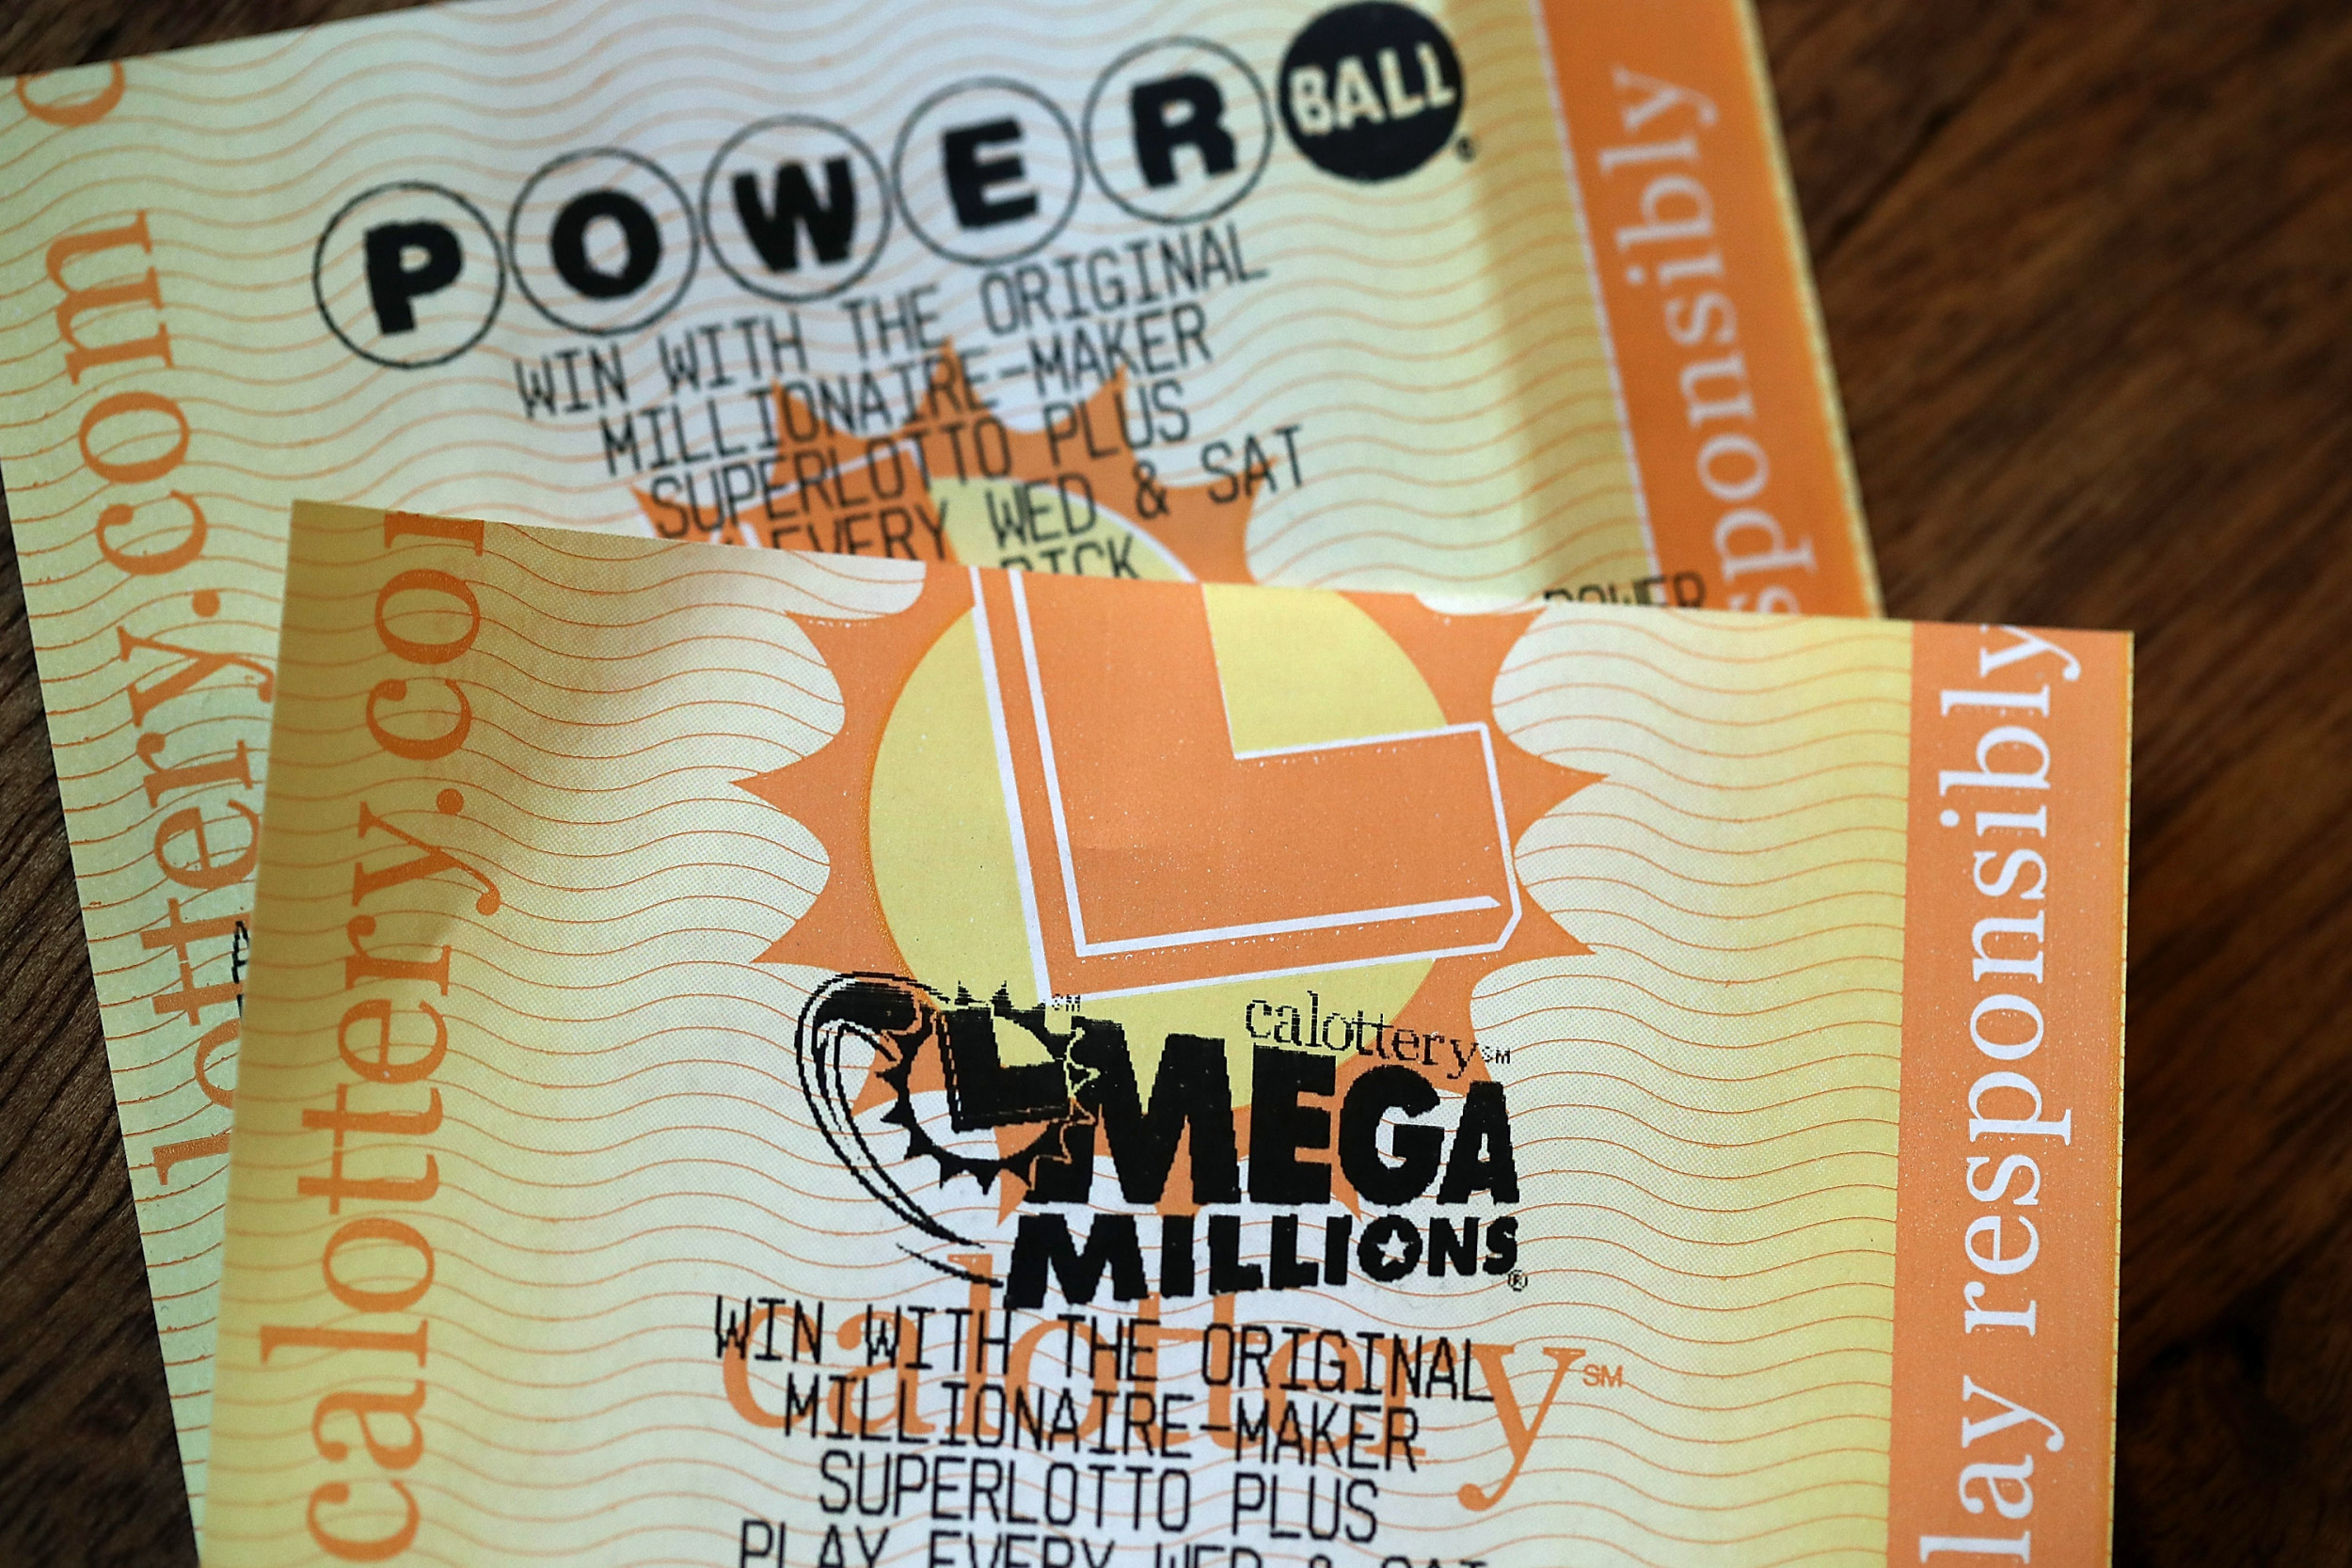 powerball and super lotto winning numbers